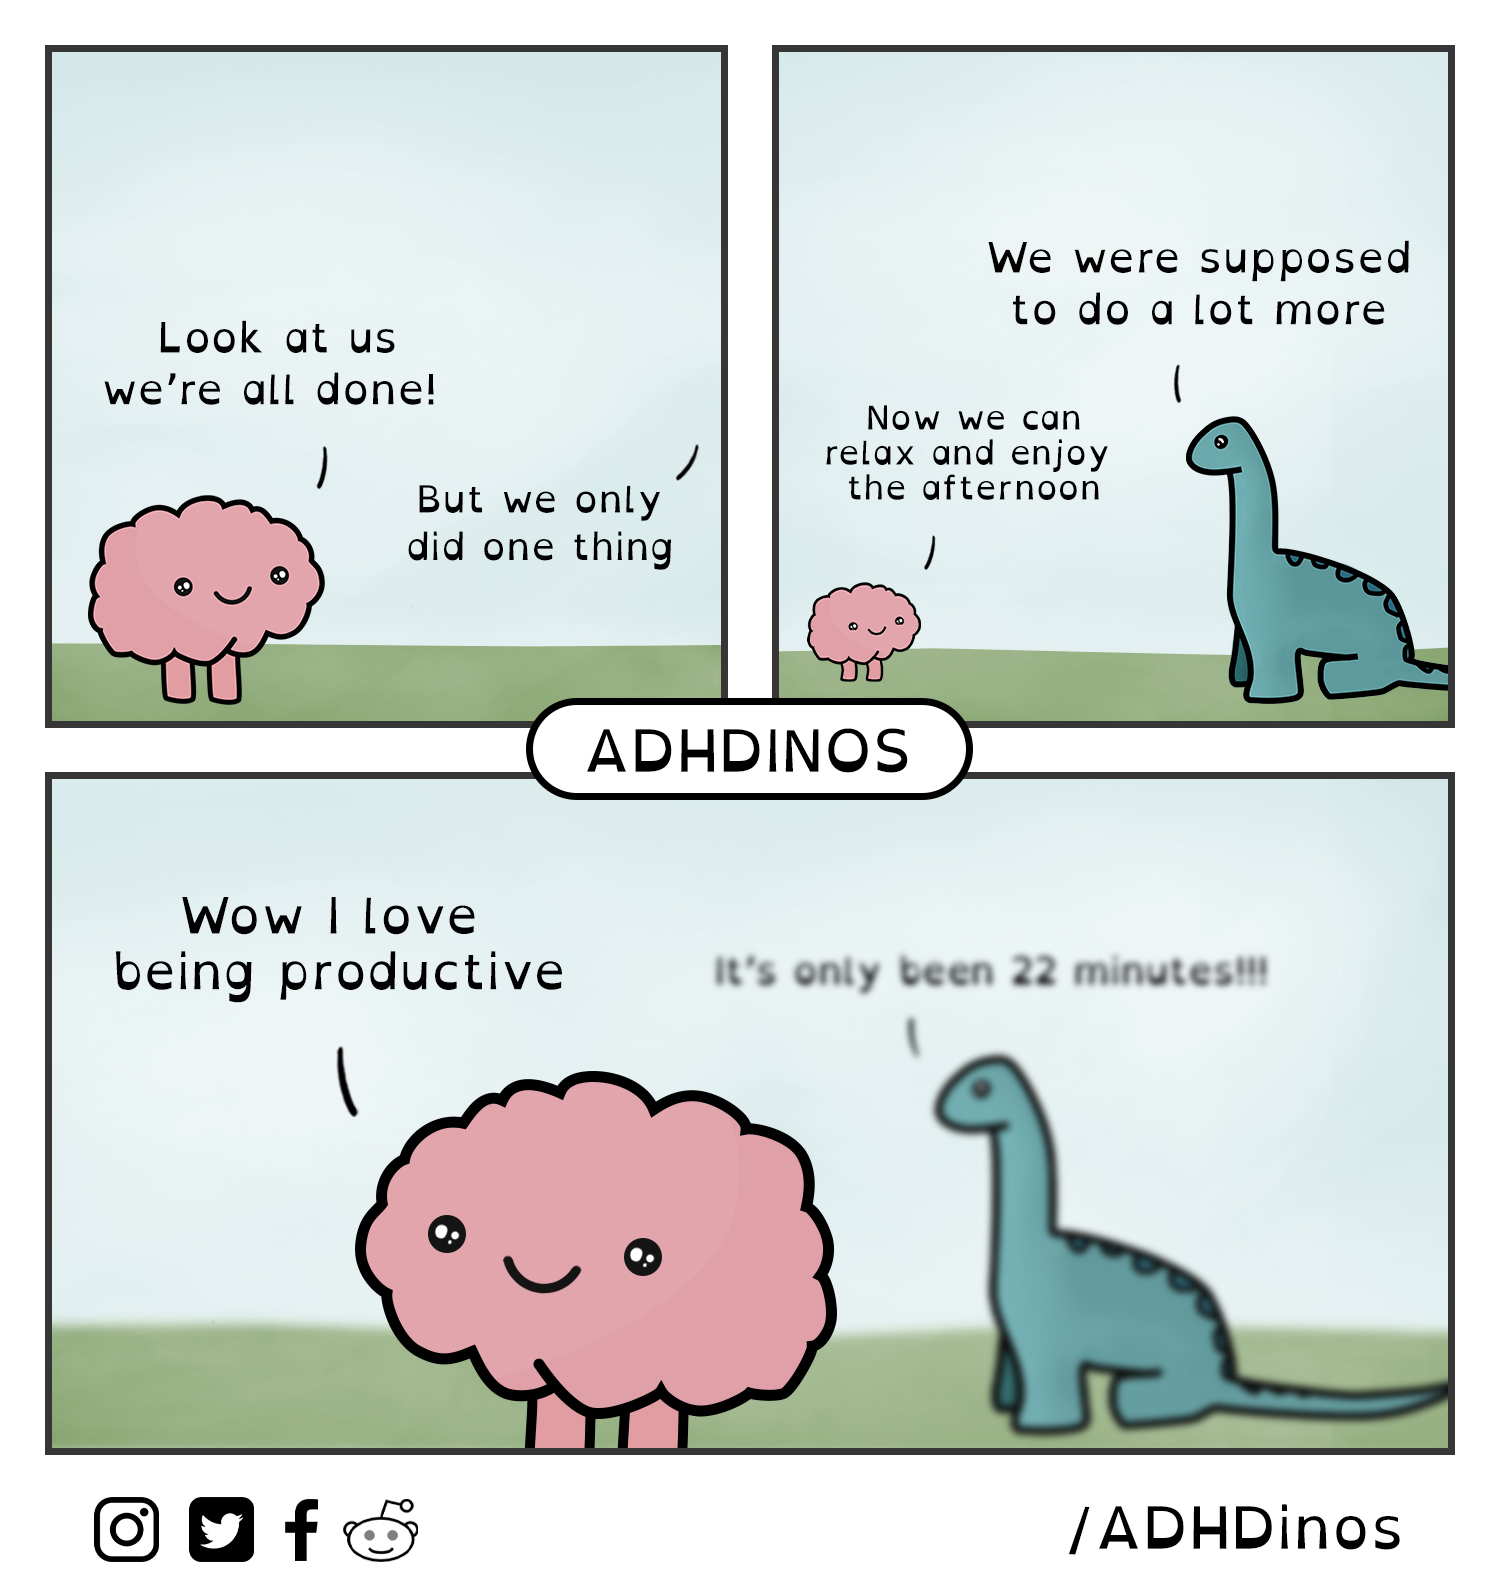 A brain saying "Look at us we're all done!" A dino saying "But we only did one thing" Brain: "Now we can relax and enjoy the afternoon" Dino: "We were supposed to do a lot more." Brain: "Wow I love being productive" Dino, way off in the background: "It's only been 22 minutes!!!" by ADHDinos